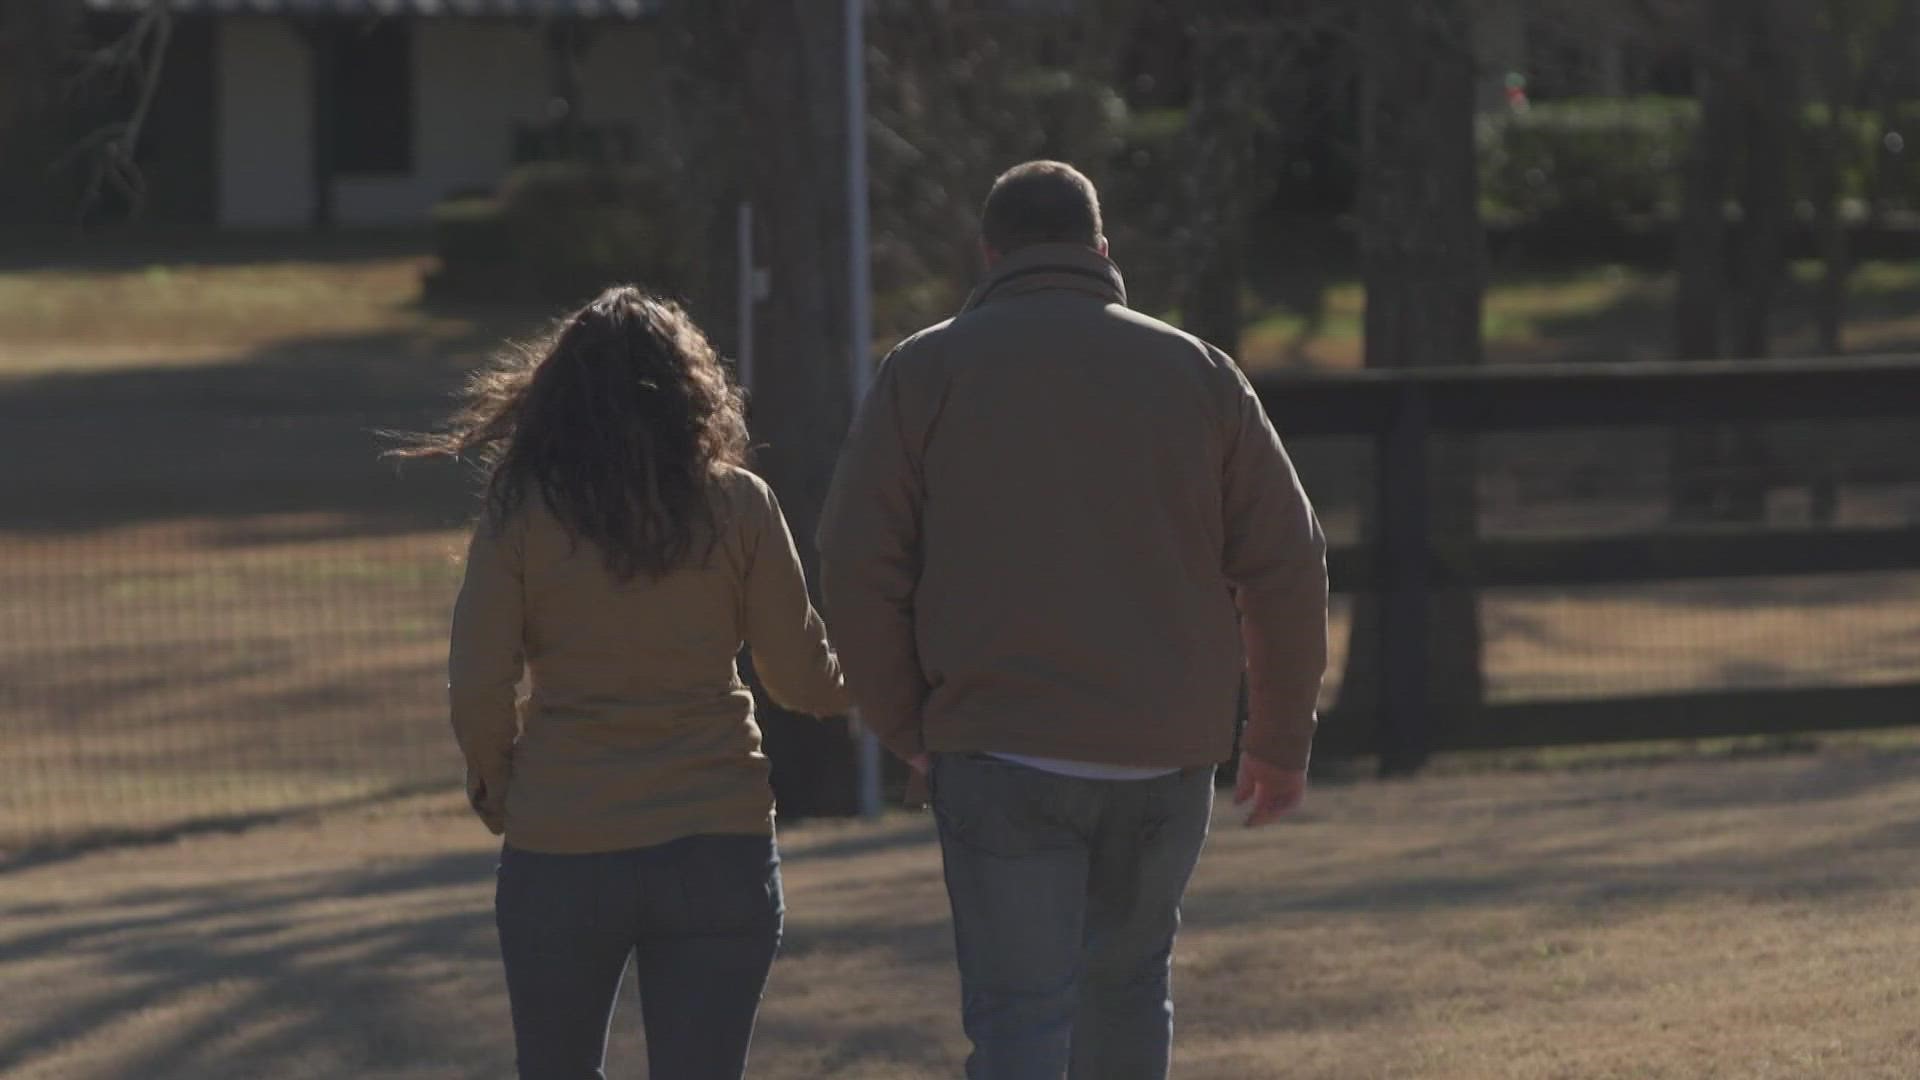 Aubrey and Bryan Schlackman are searching for land. They’ve already launched a ministry providing financial, emotional and religious support to pregnant single moms.